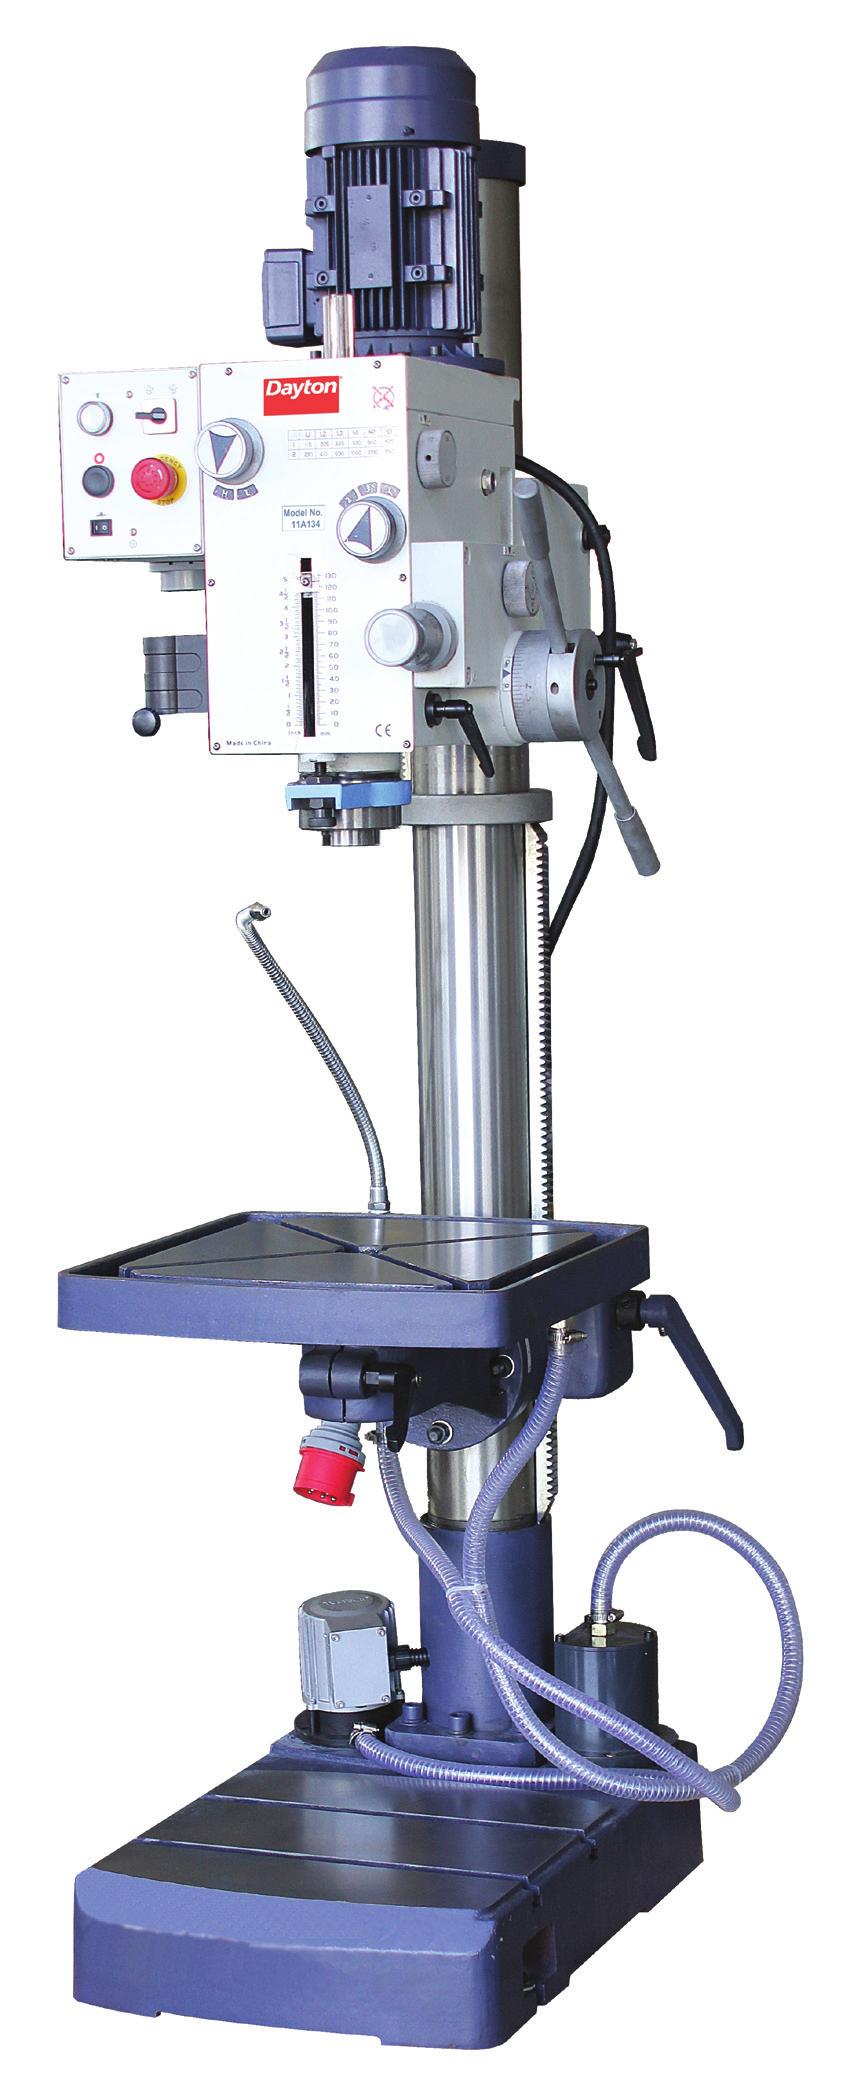 22 GEAR HEAD DRILL PRESS WITH MECHANICAL CLUTCH POWERFEED Ruggedly constructed Dayton's 22 gear head drill press delivers full power at any speed and has the operational features to withstand